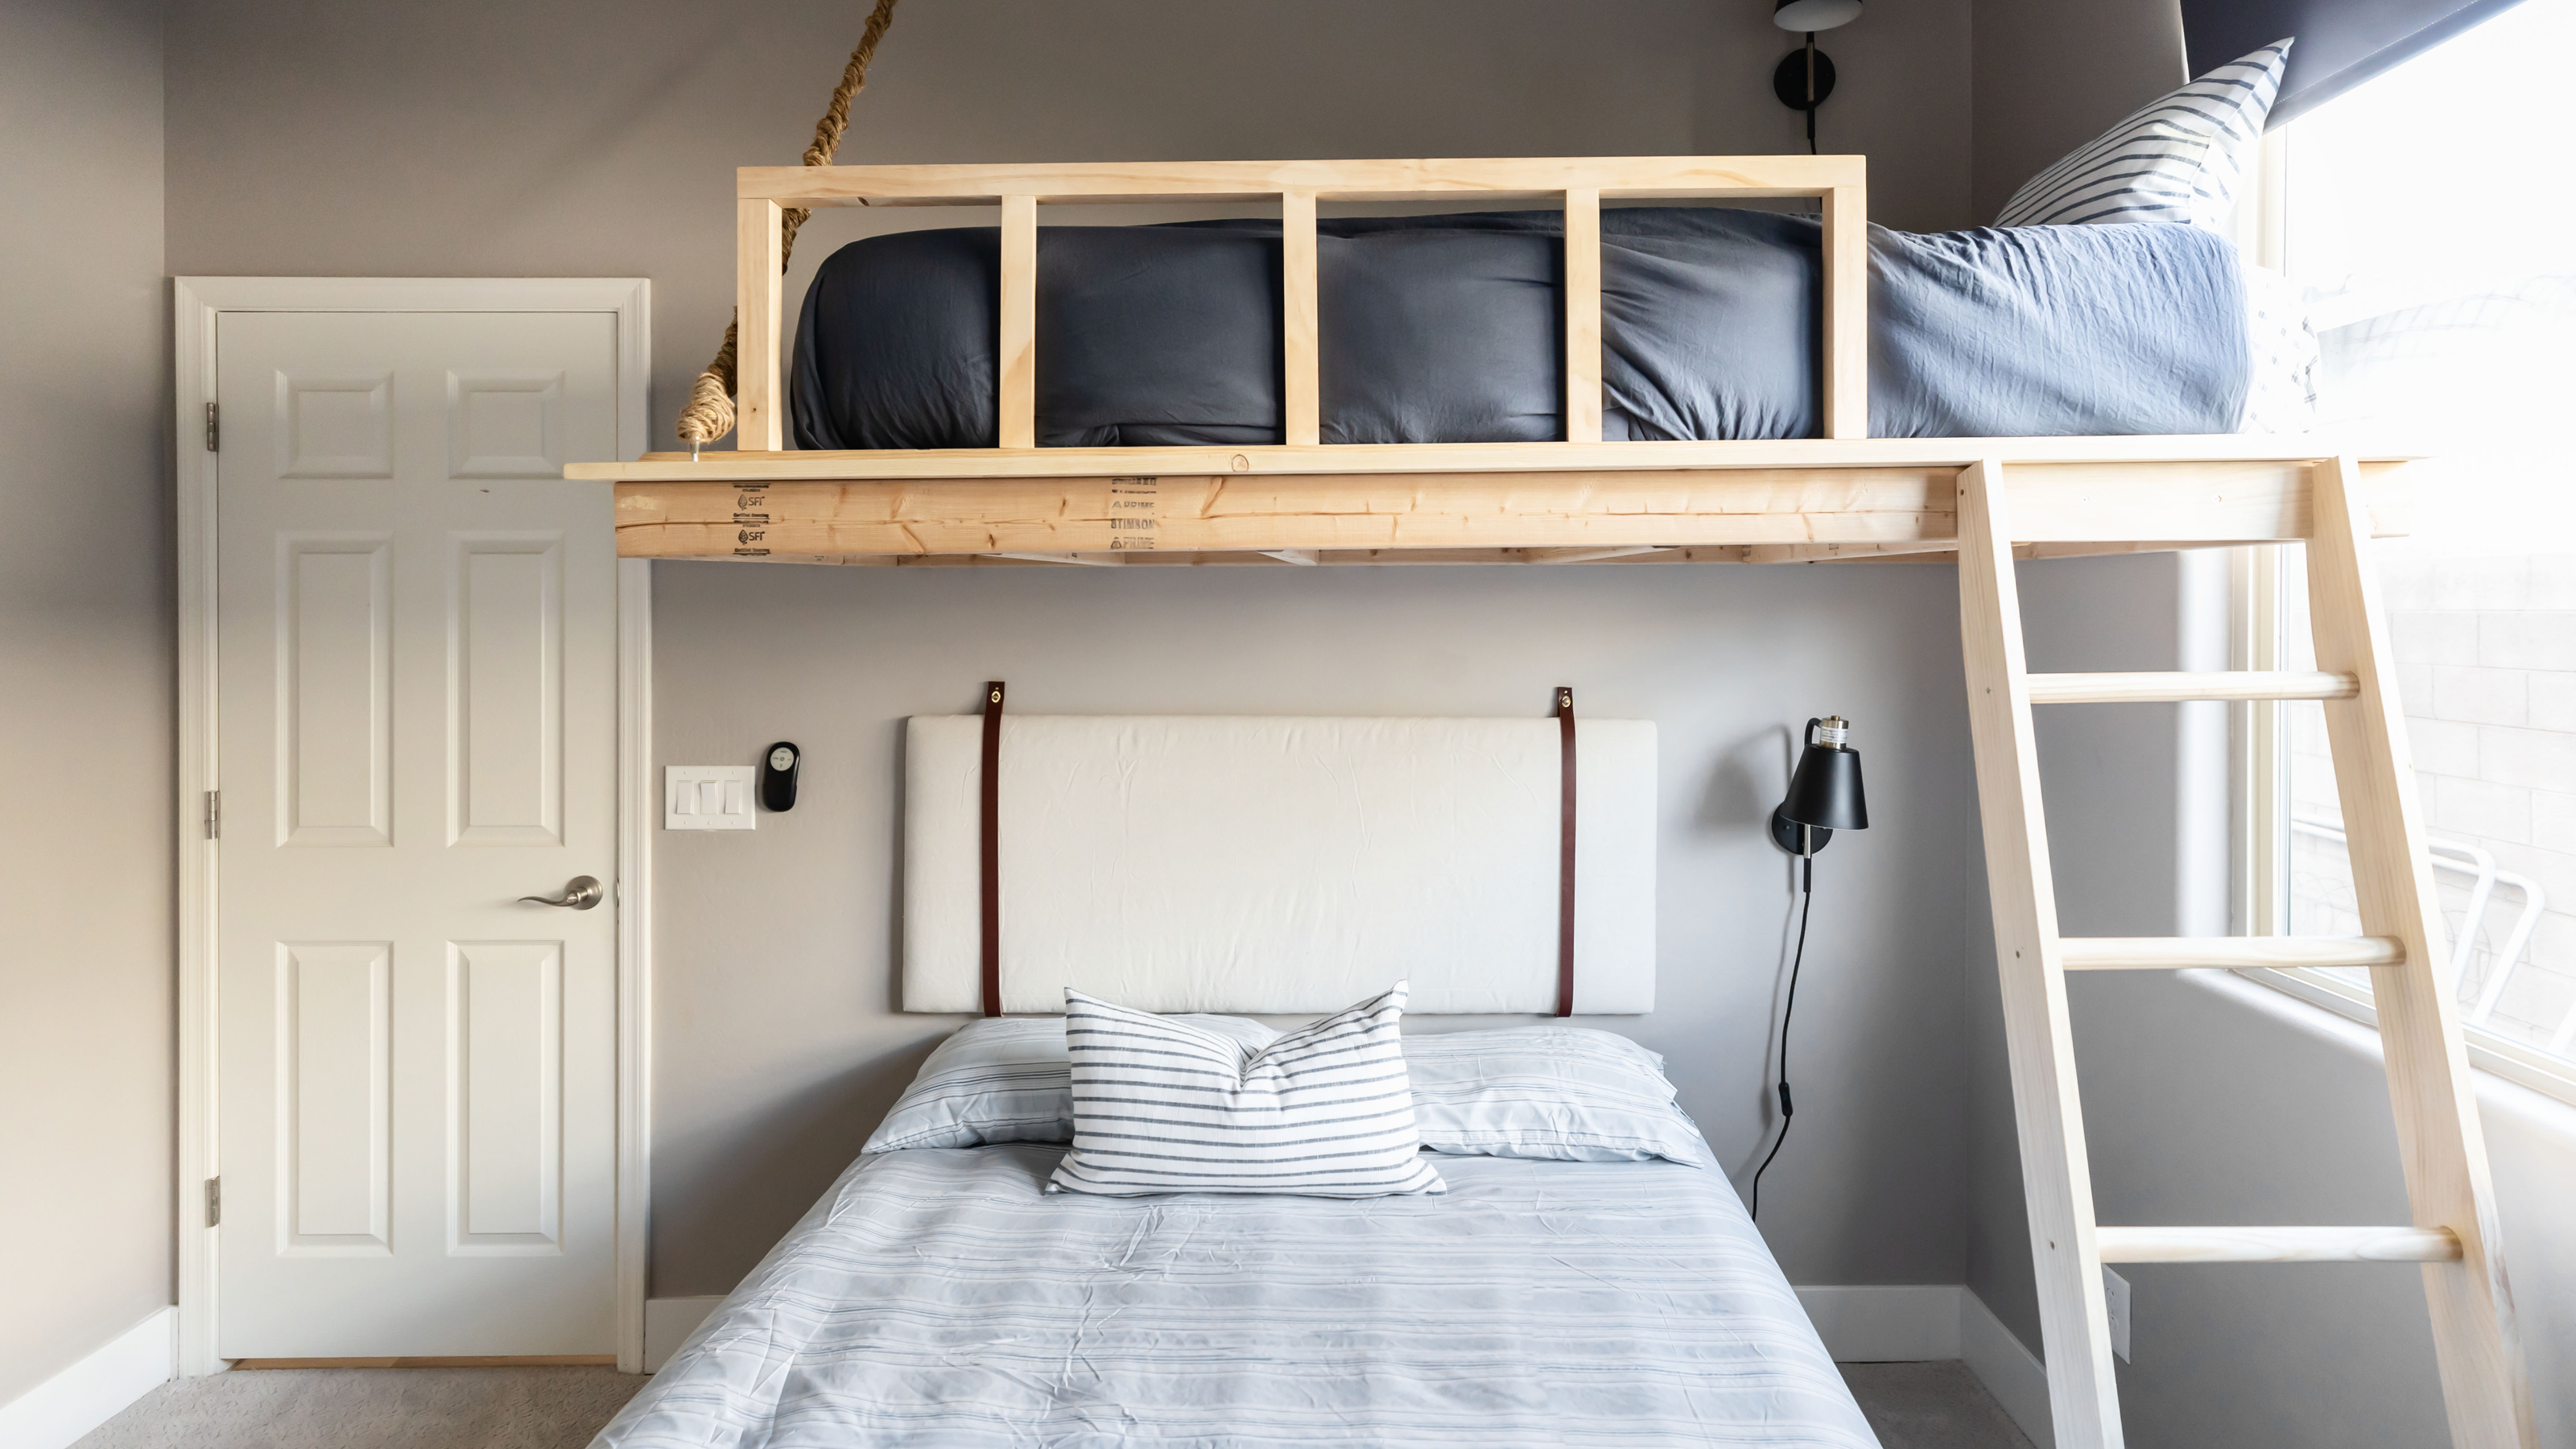 How To Build A Loft Bed Diy With This, Easy Way To Make Up Bunk Beds